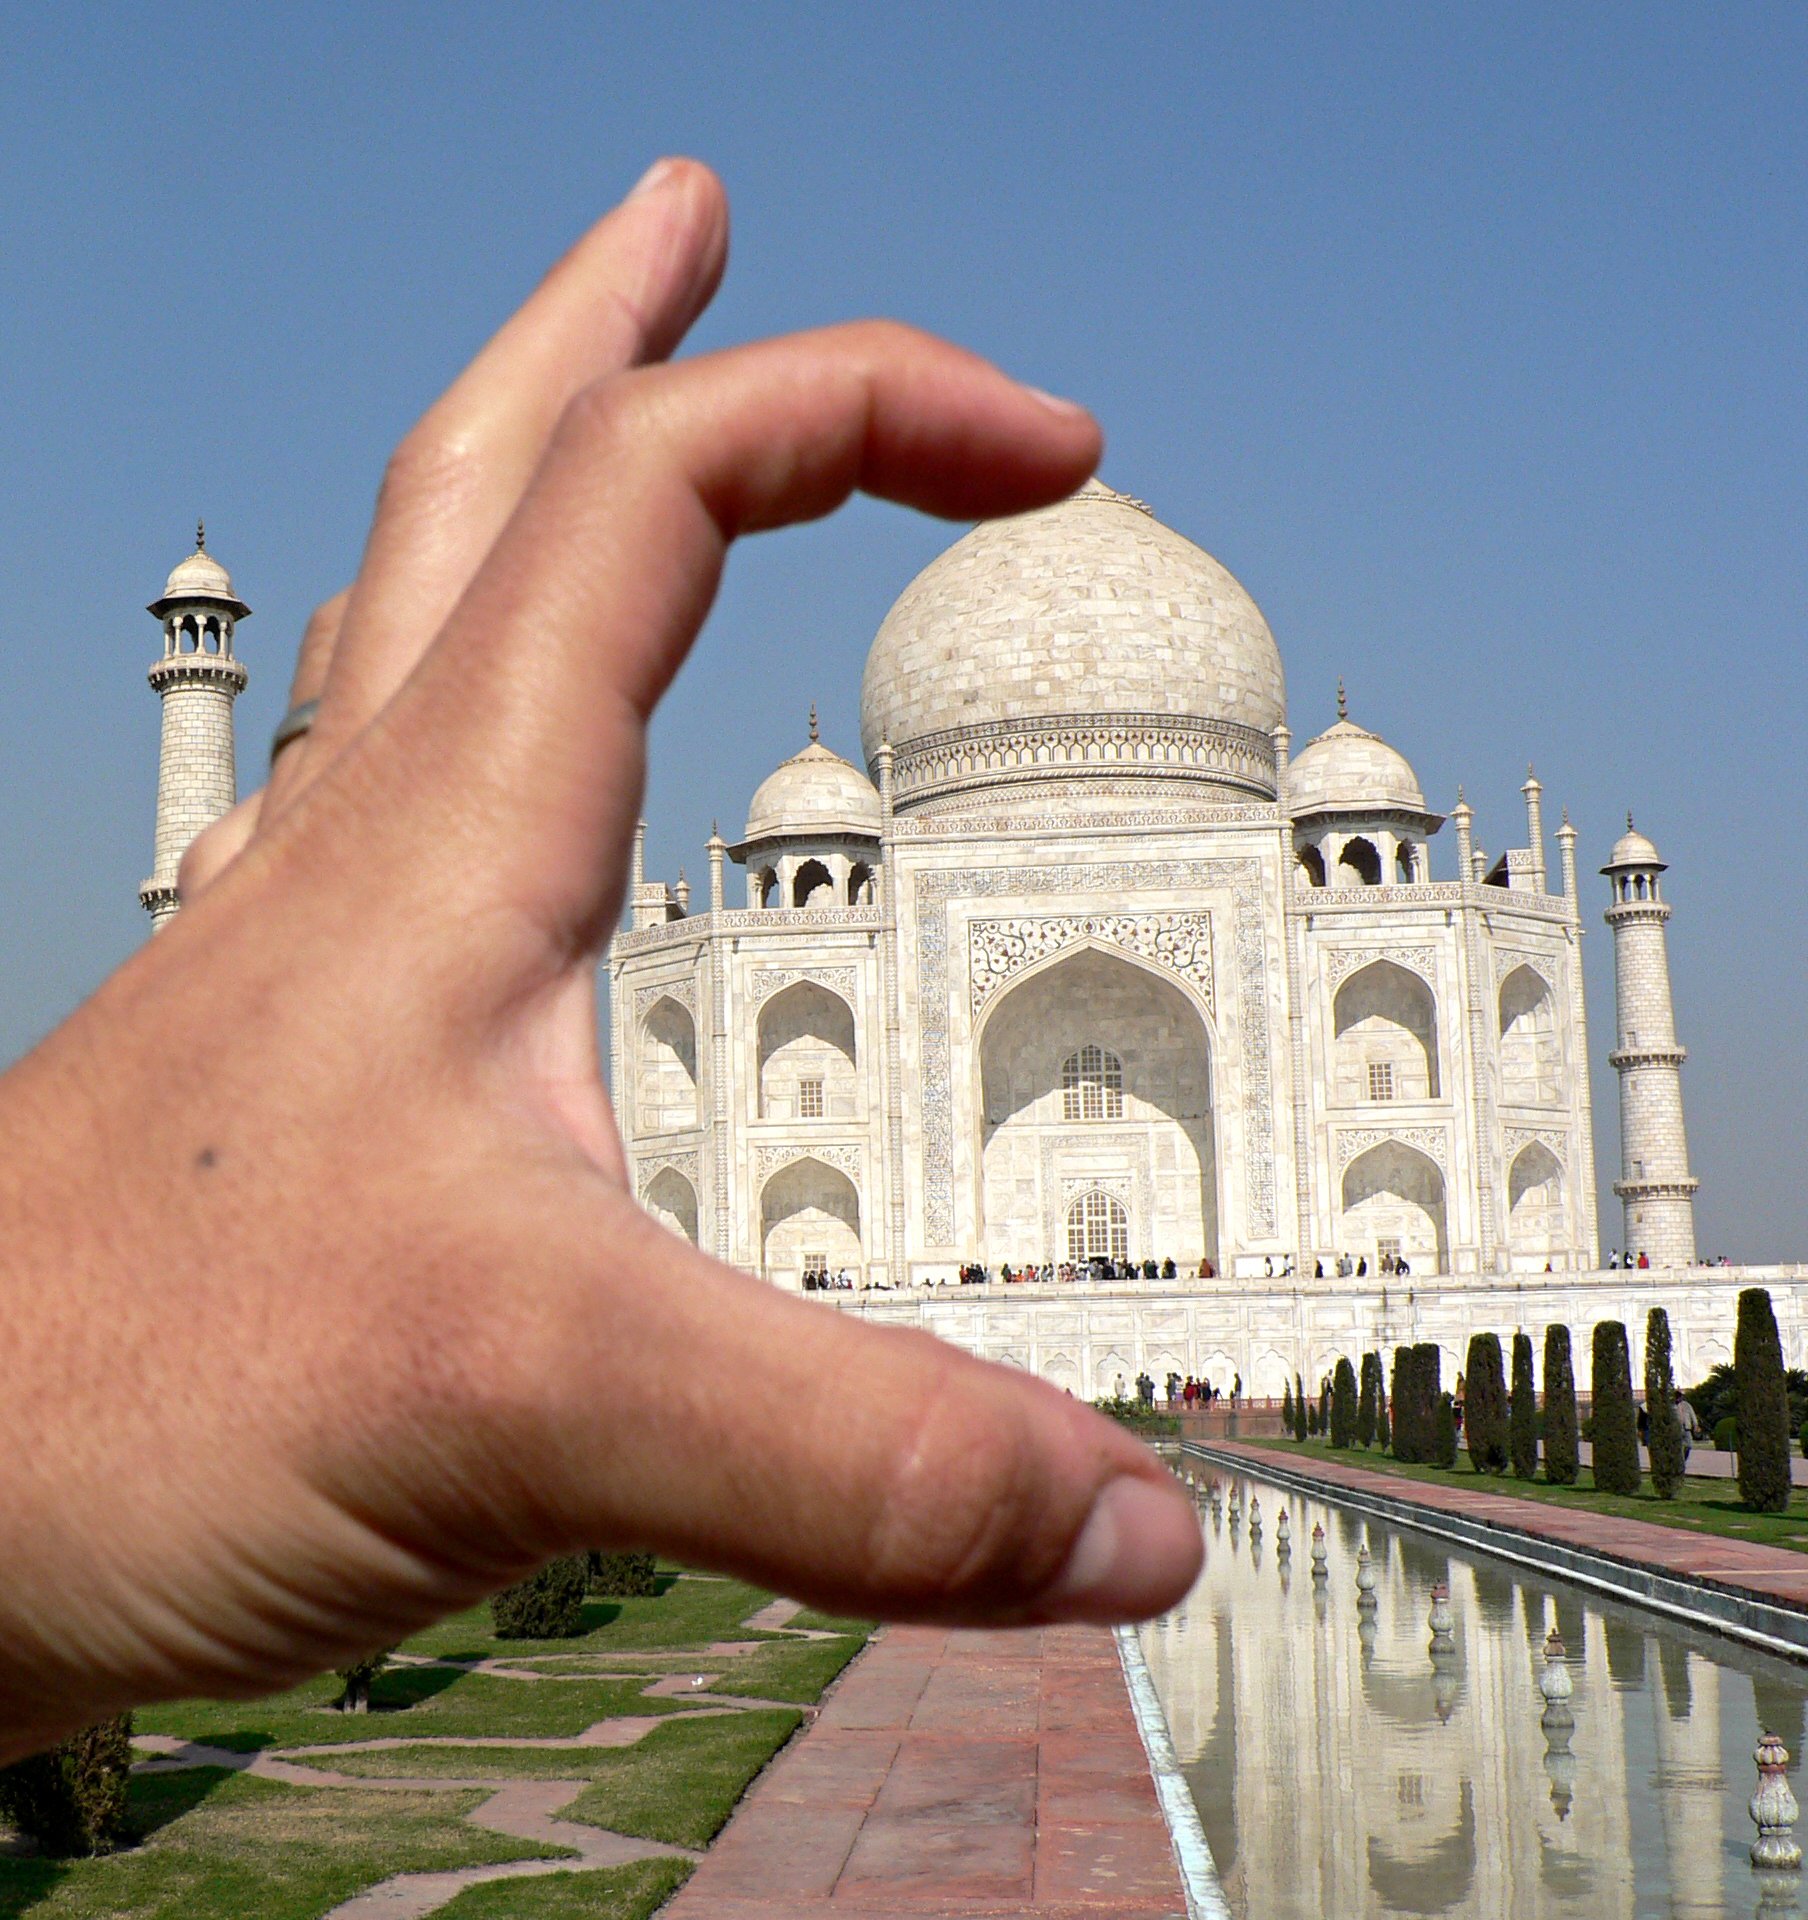 Why were the builders of the taj mahal hands cut off